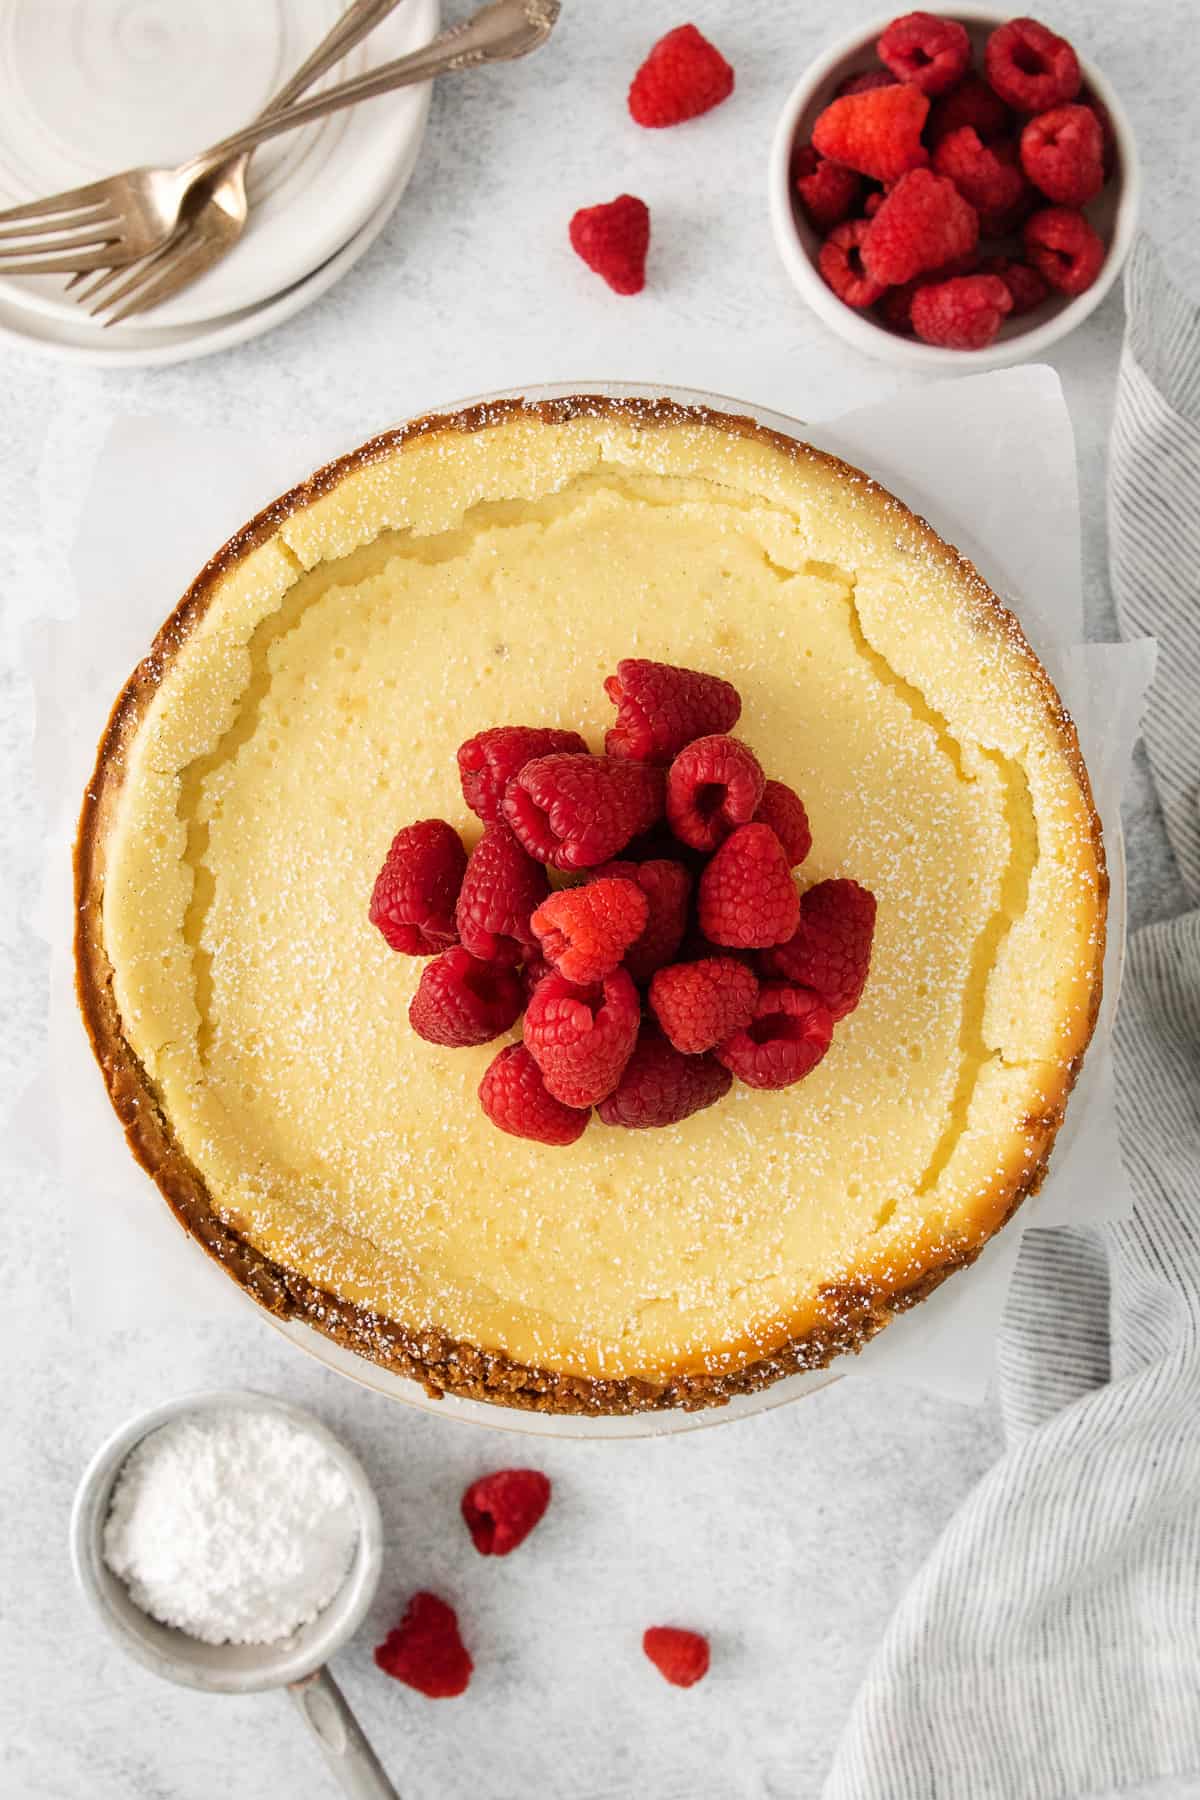 Ricotta cheesecake topped with raspberries.